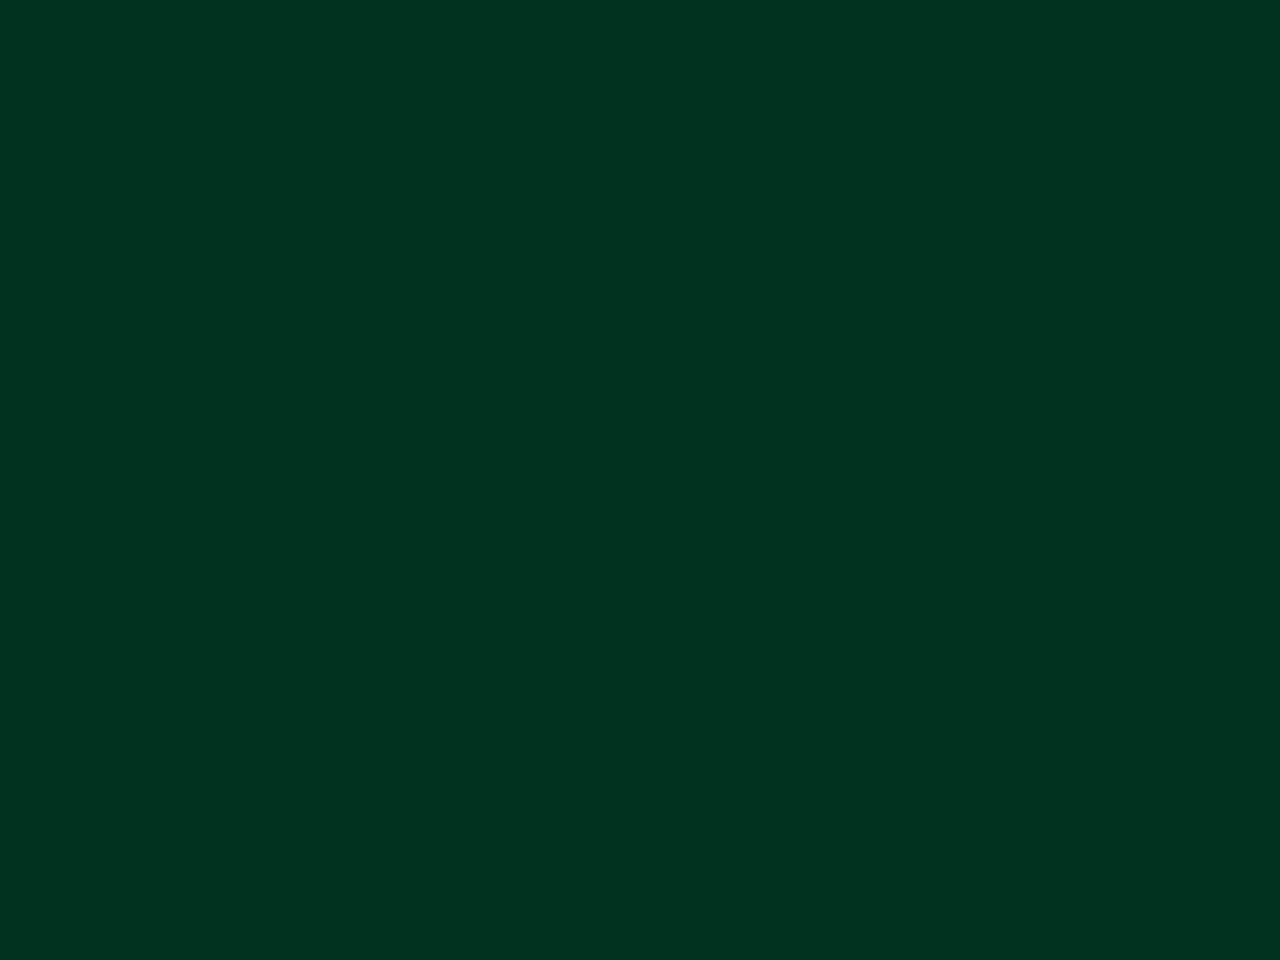 1280x960 Dark Green Solid Color Background